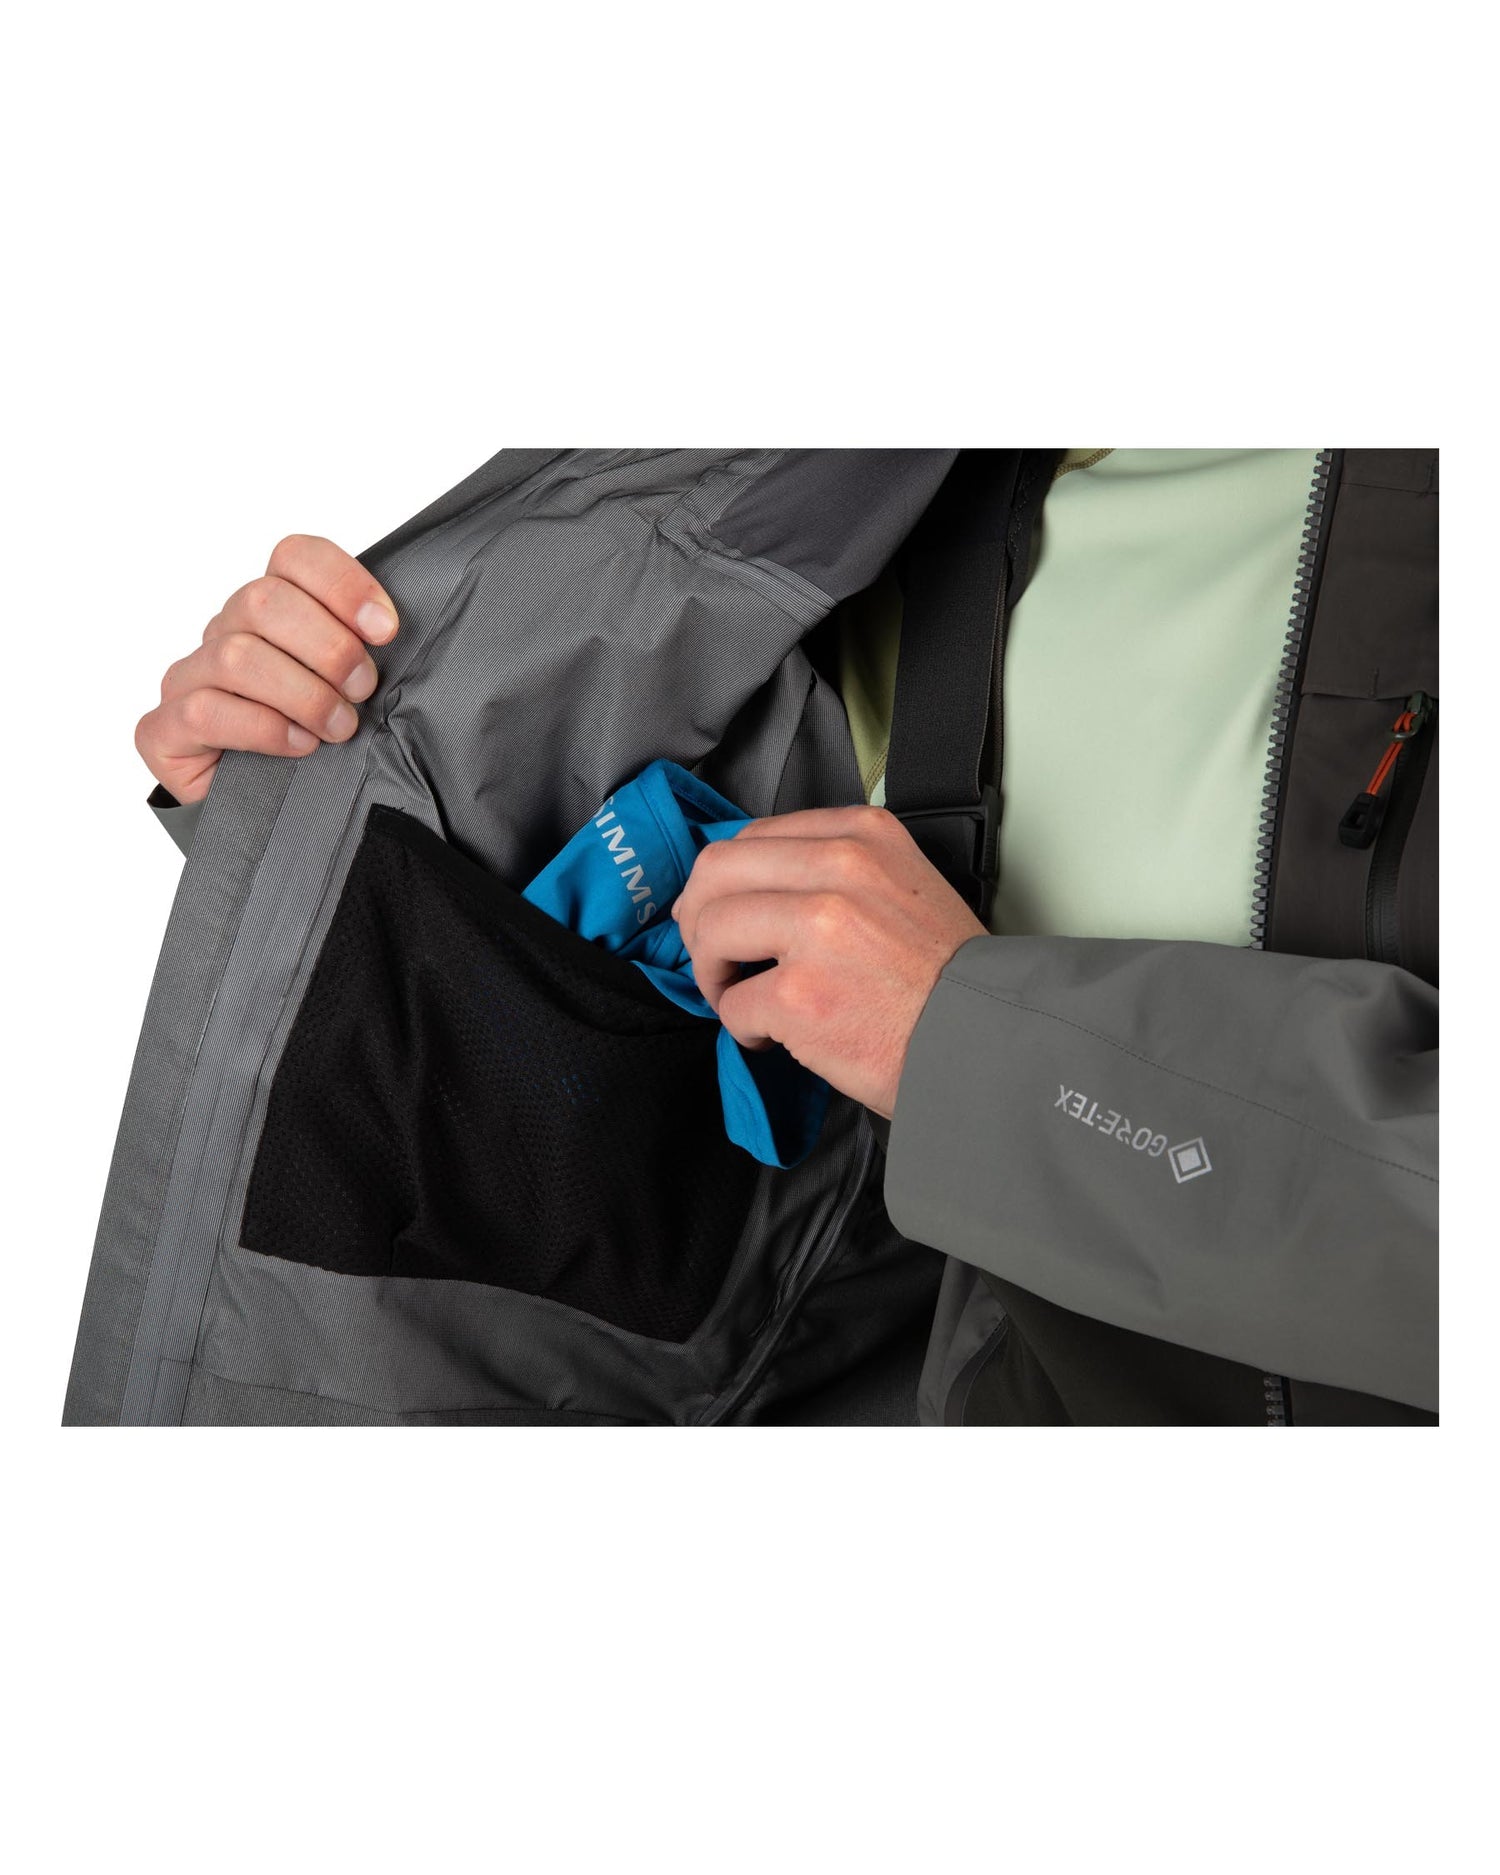 Simms M's G3 Guide Wading Jacket